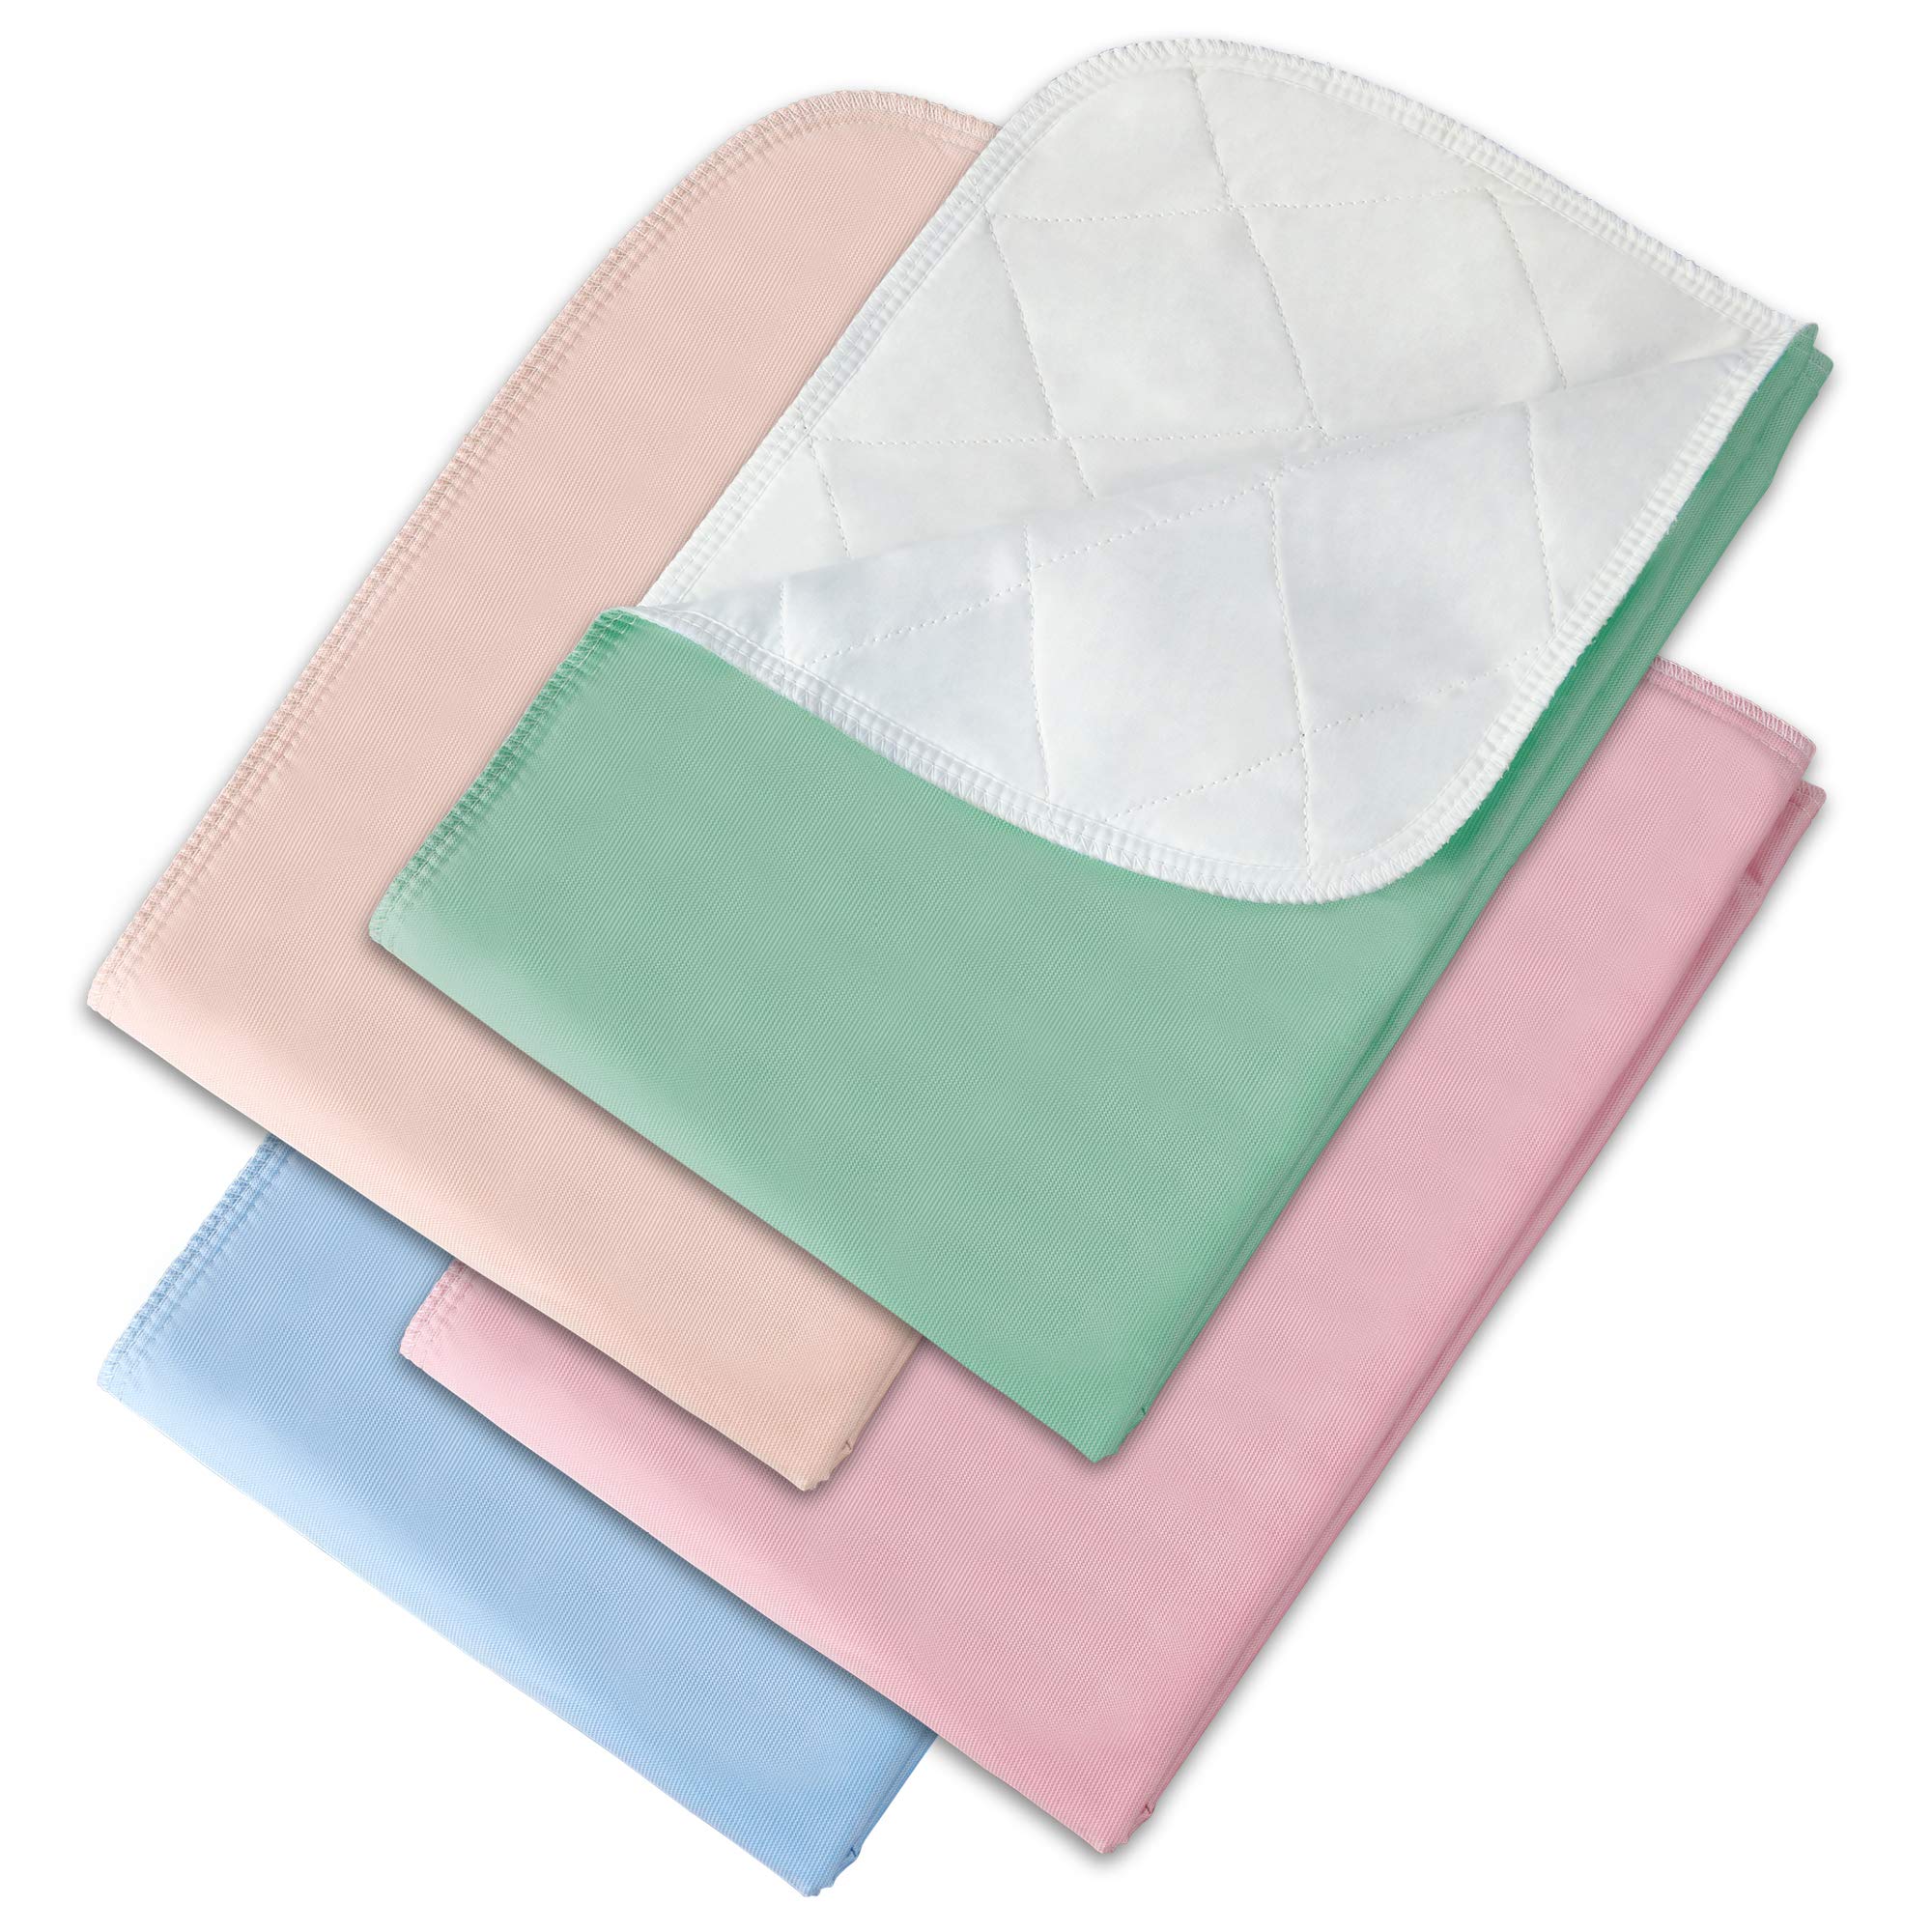 Royal Care Incontinence Bed Pads - Reusable Waterproof